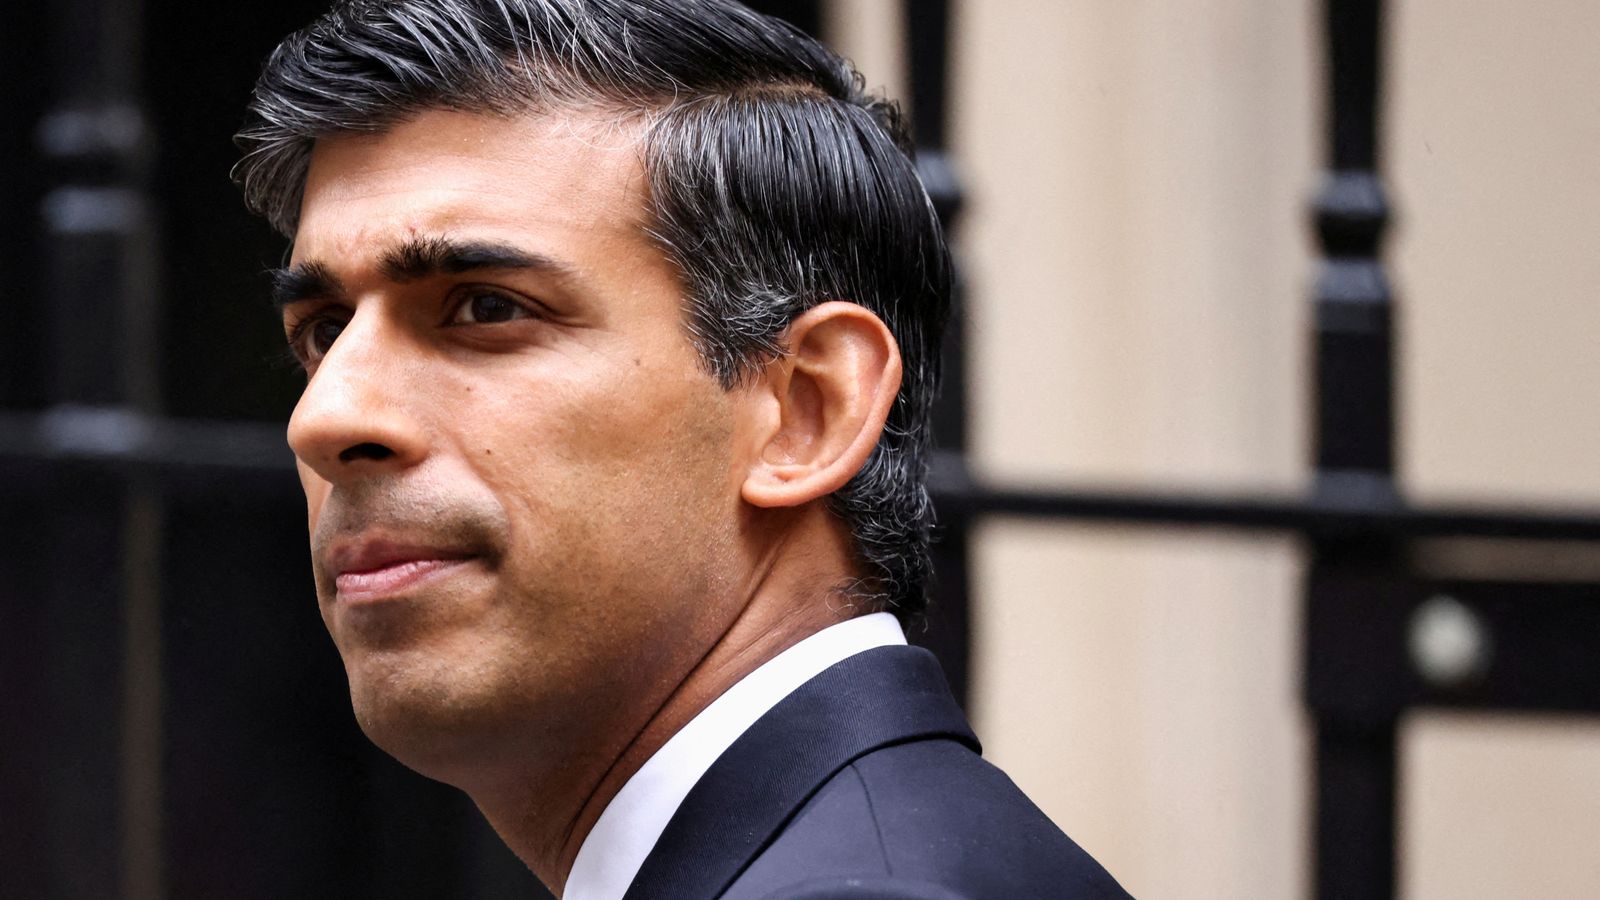 Rishi Sunak ducks 3% defence spending commitment - but points to 'track record' on investment